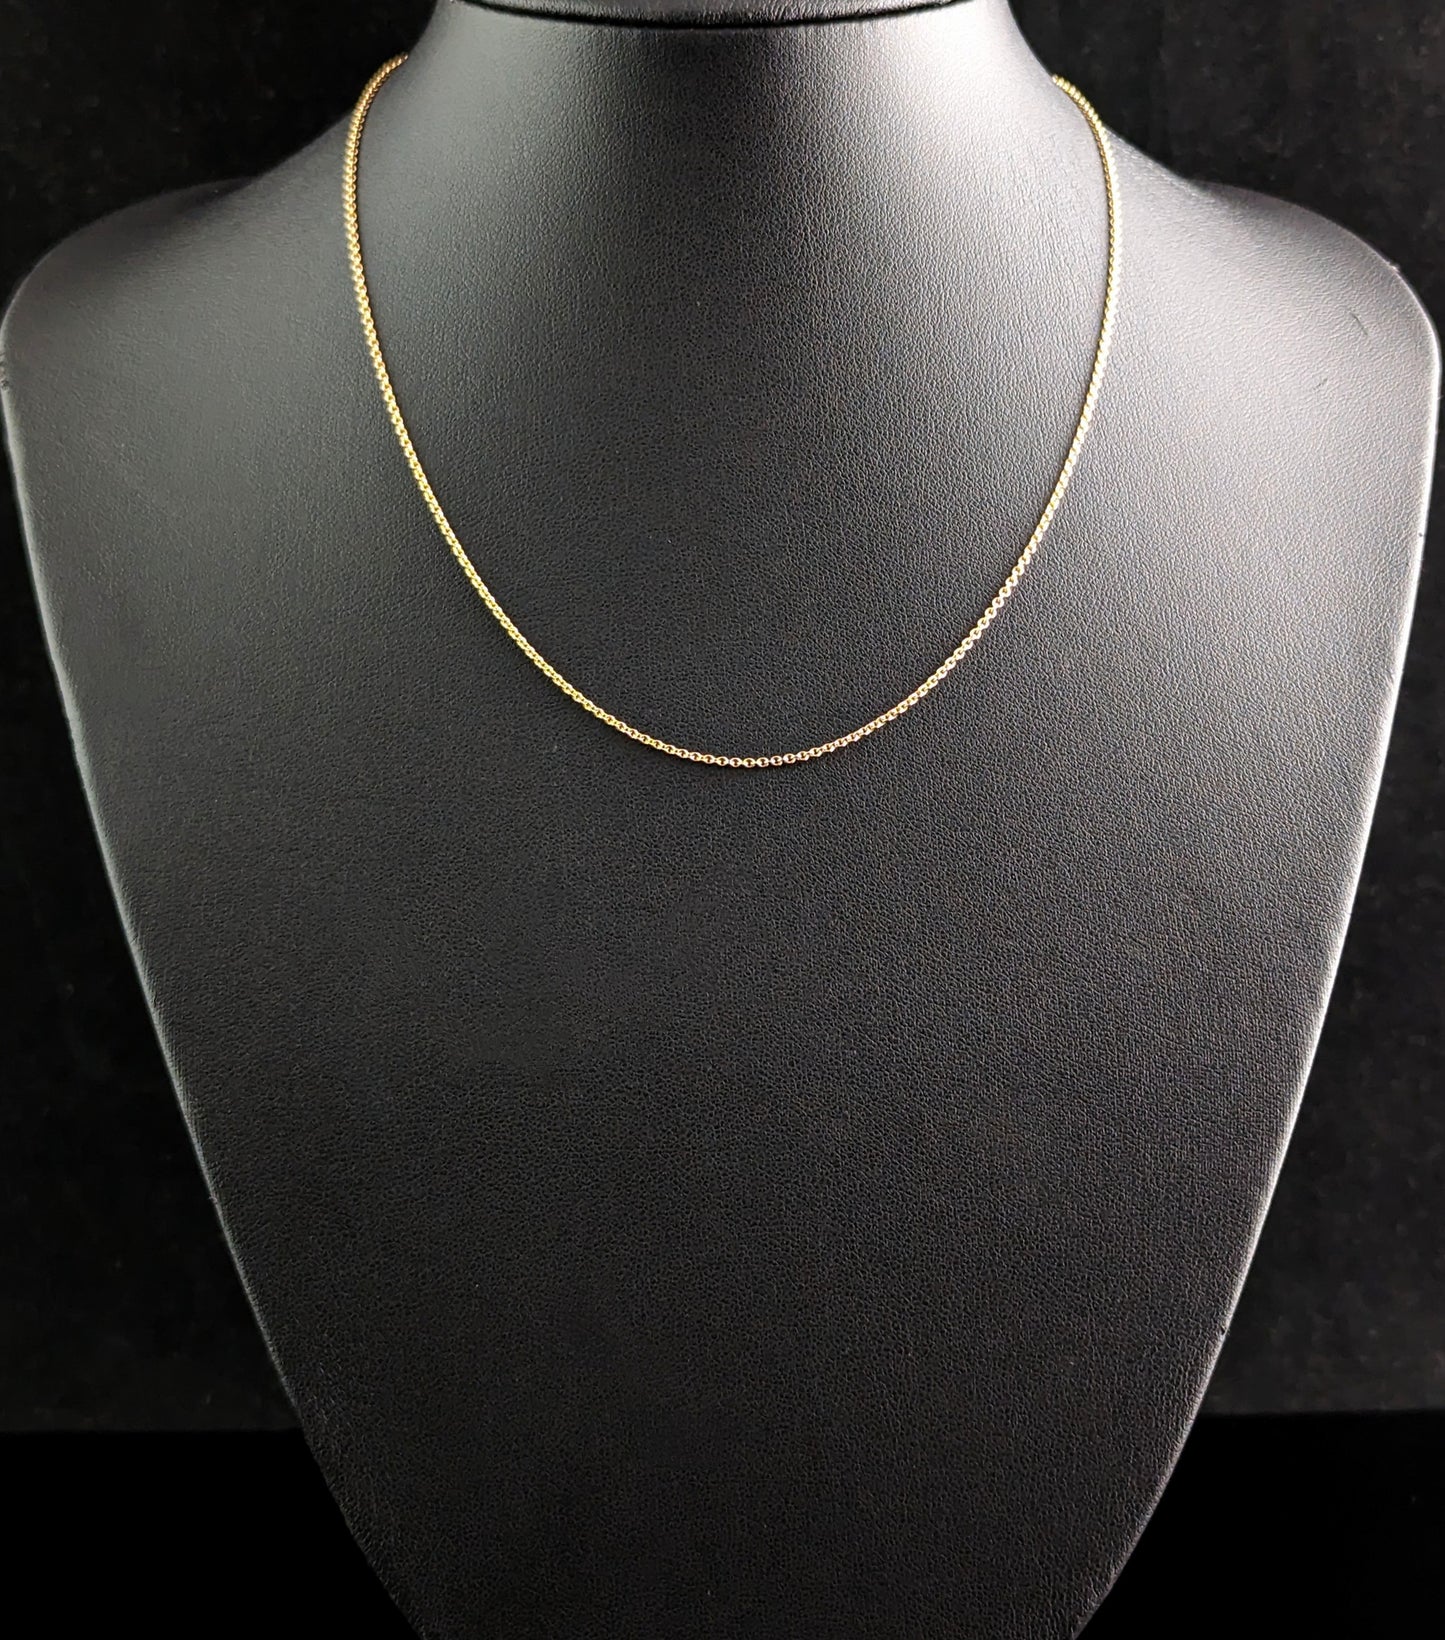 Antique 9ct gold trace link chain necklace, Edwardian, Dainty